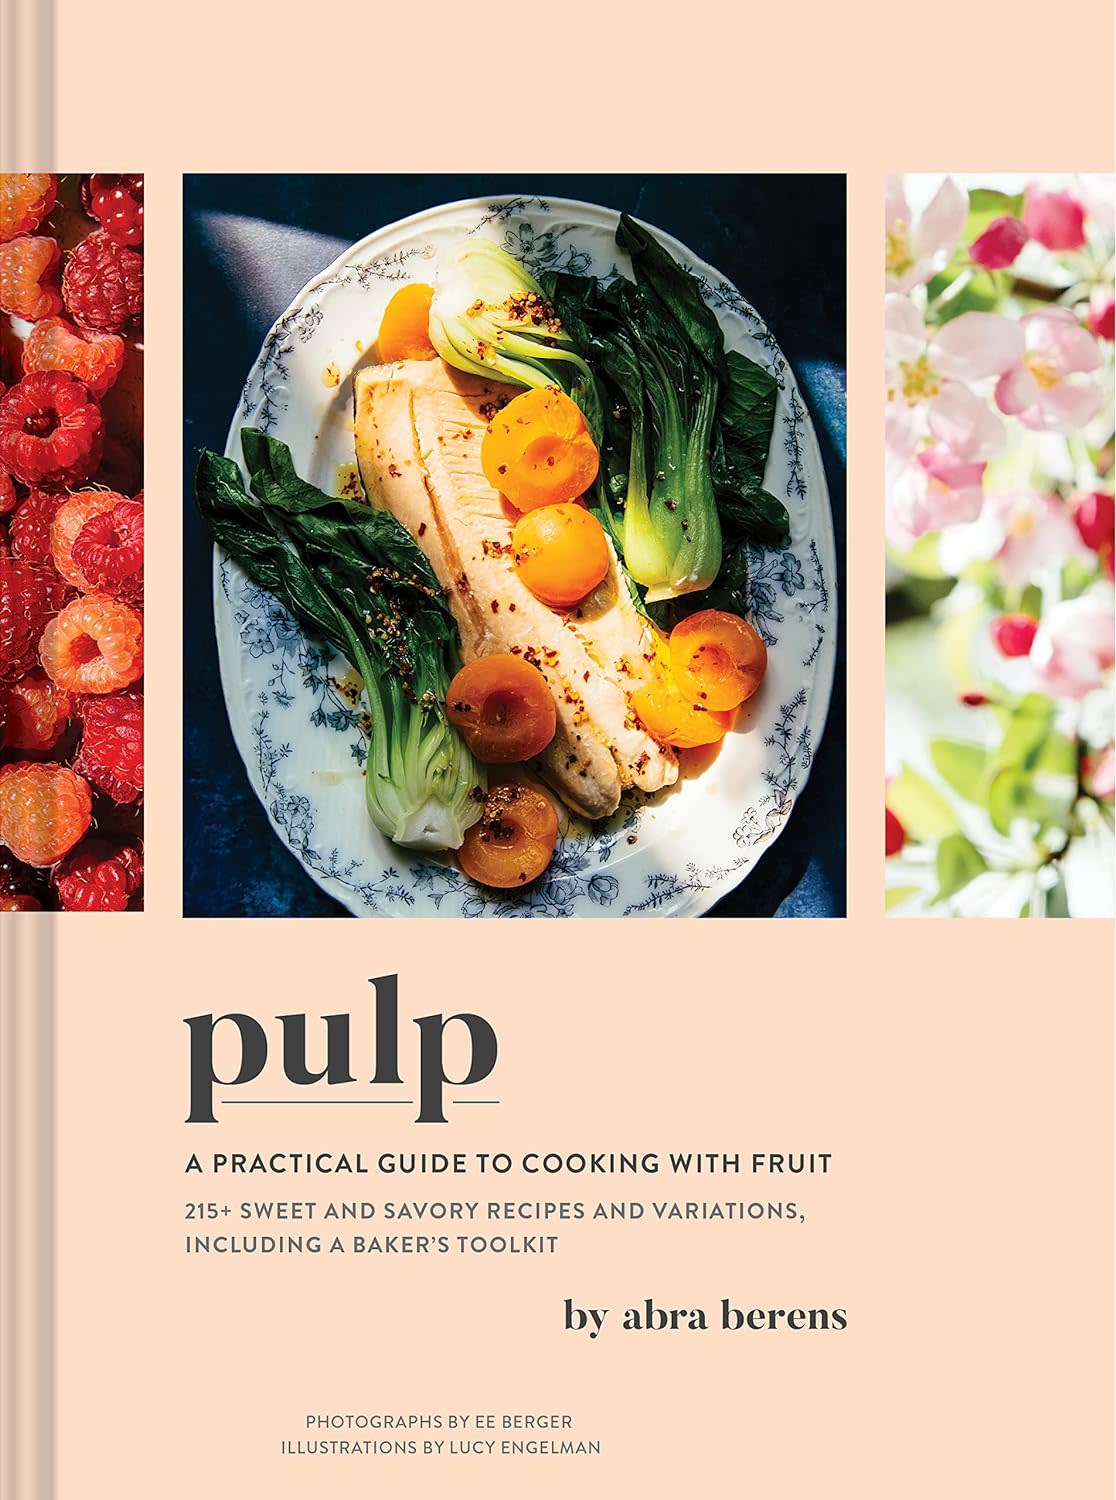 "Pulp: A Practical Guide to Cooking with Fruit"